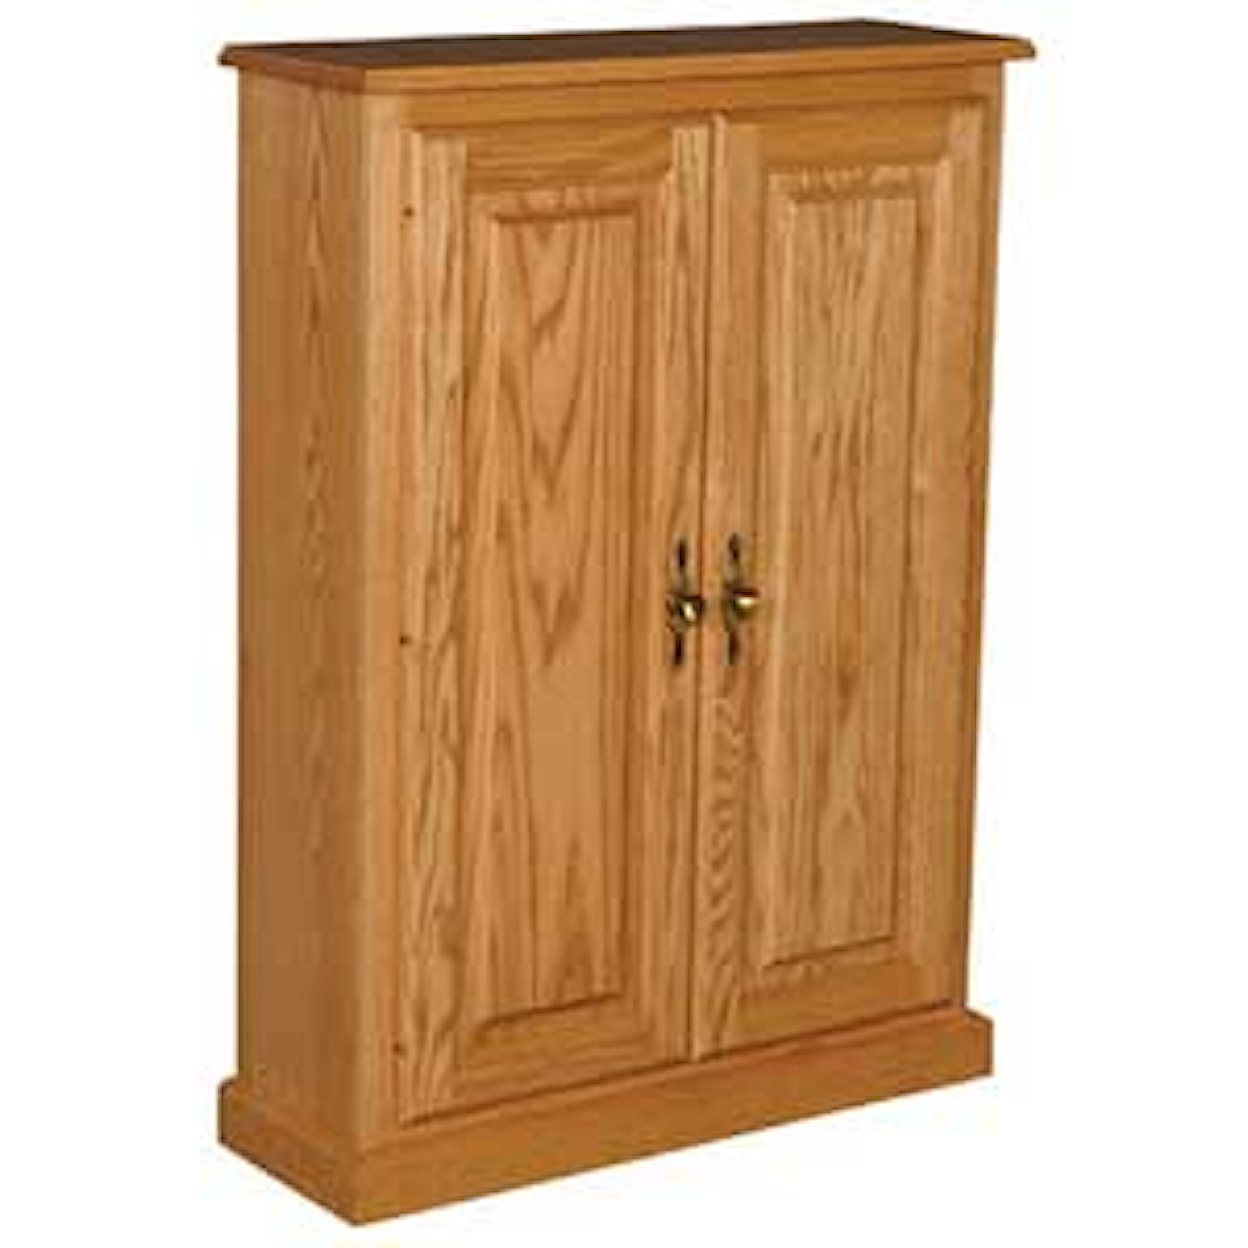 Simply Amish Classic Media Storage Cabinet